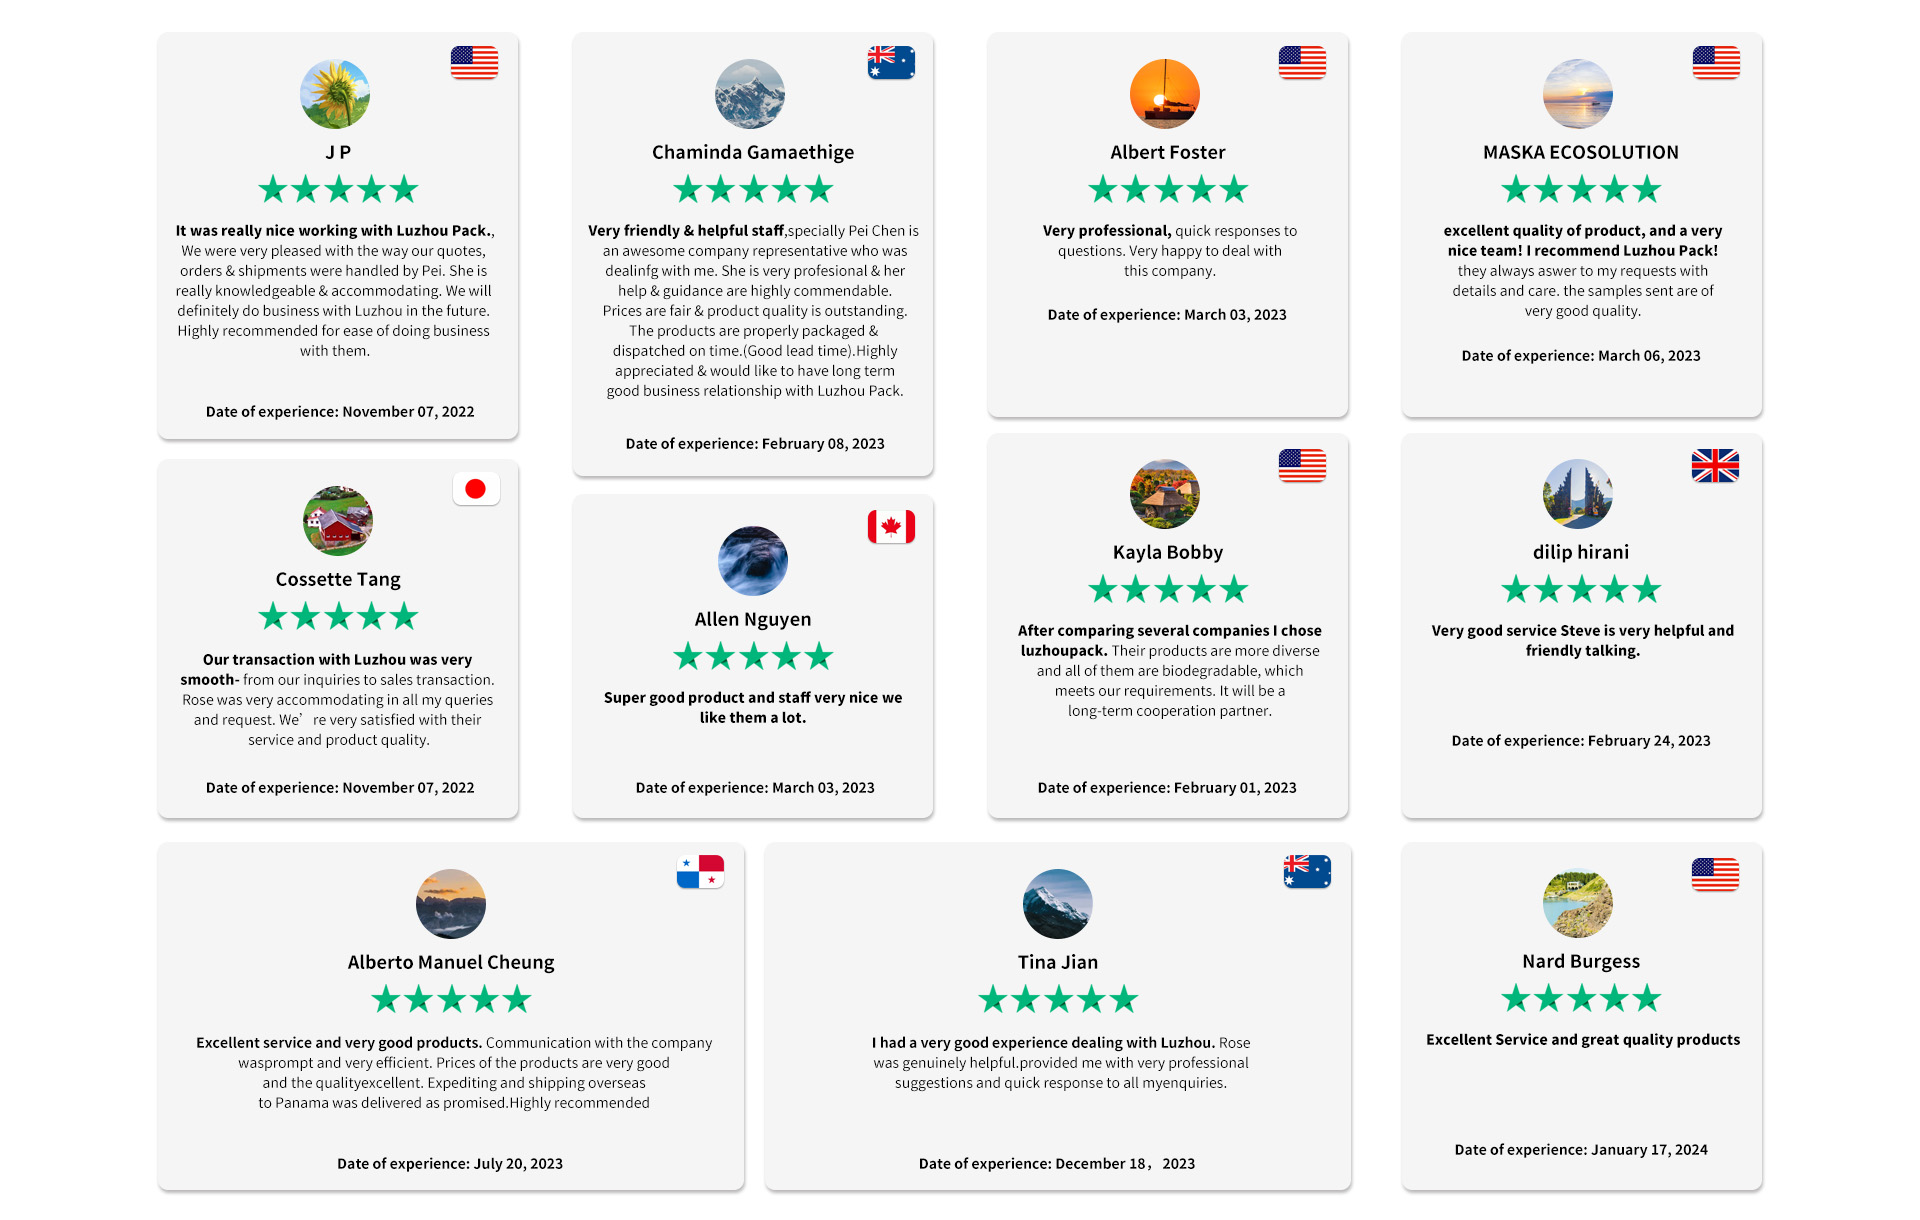 Customer reviews of our products and services on TrustPilot; they all express satisfaction.